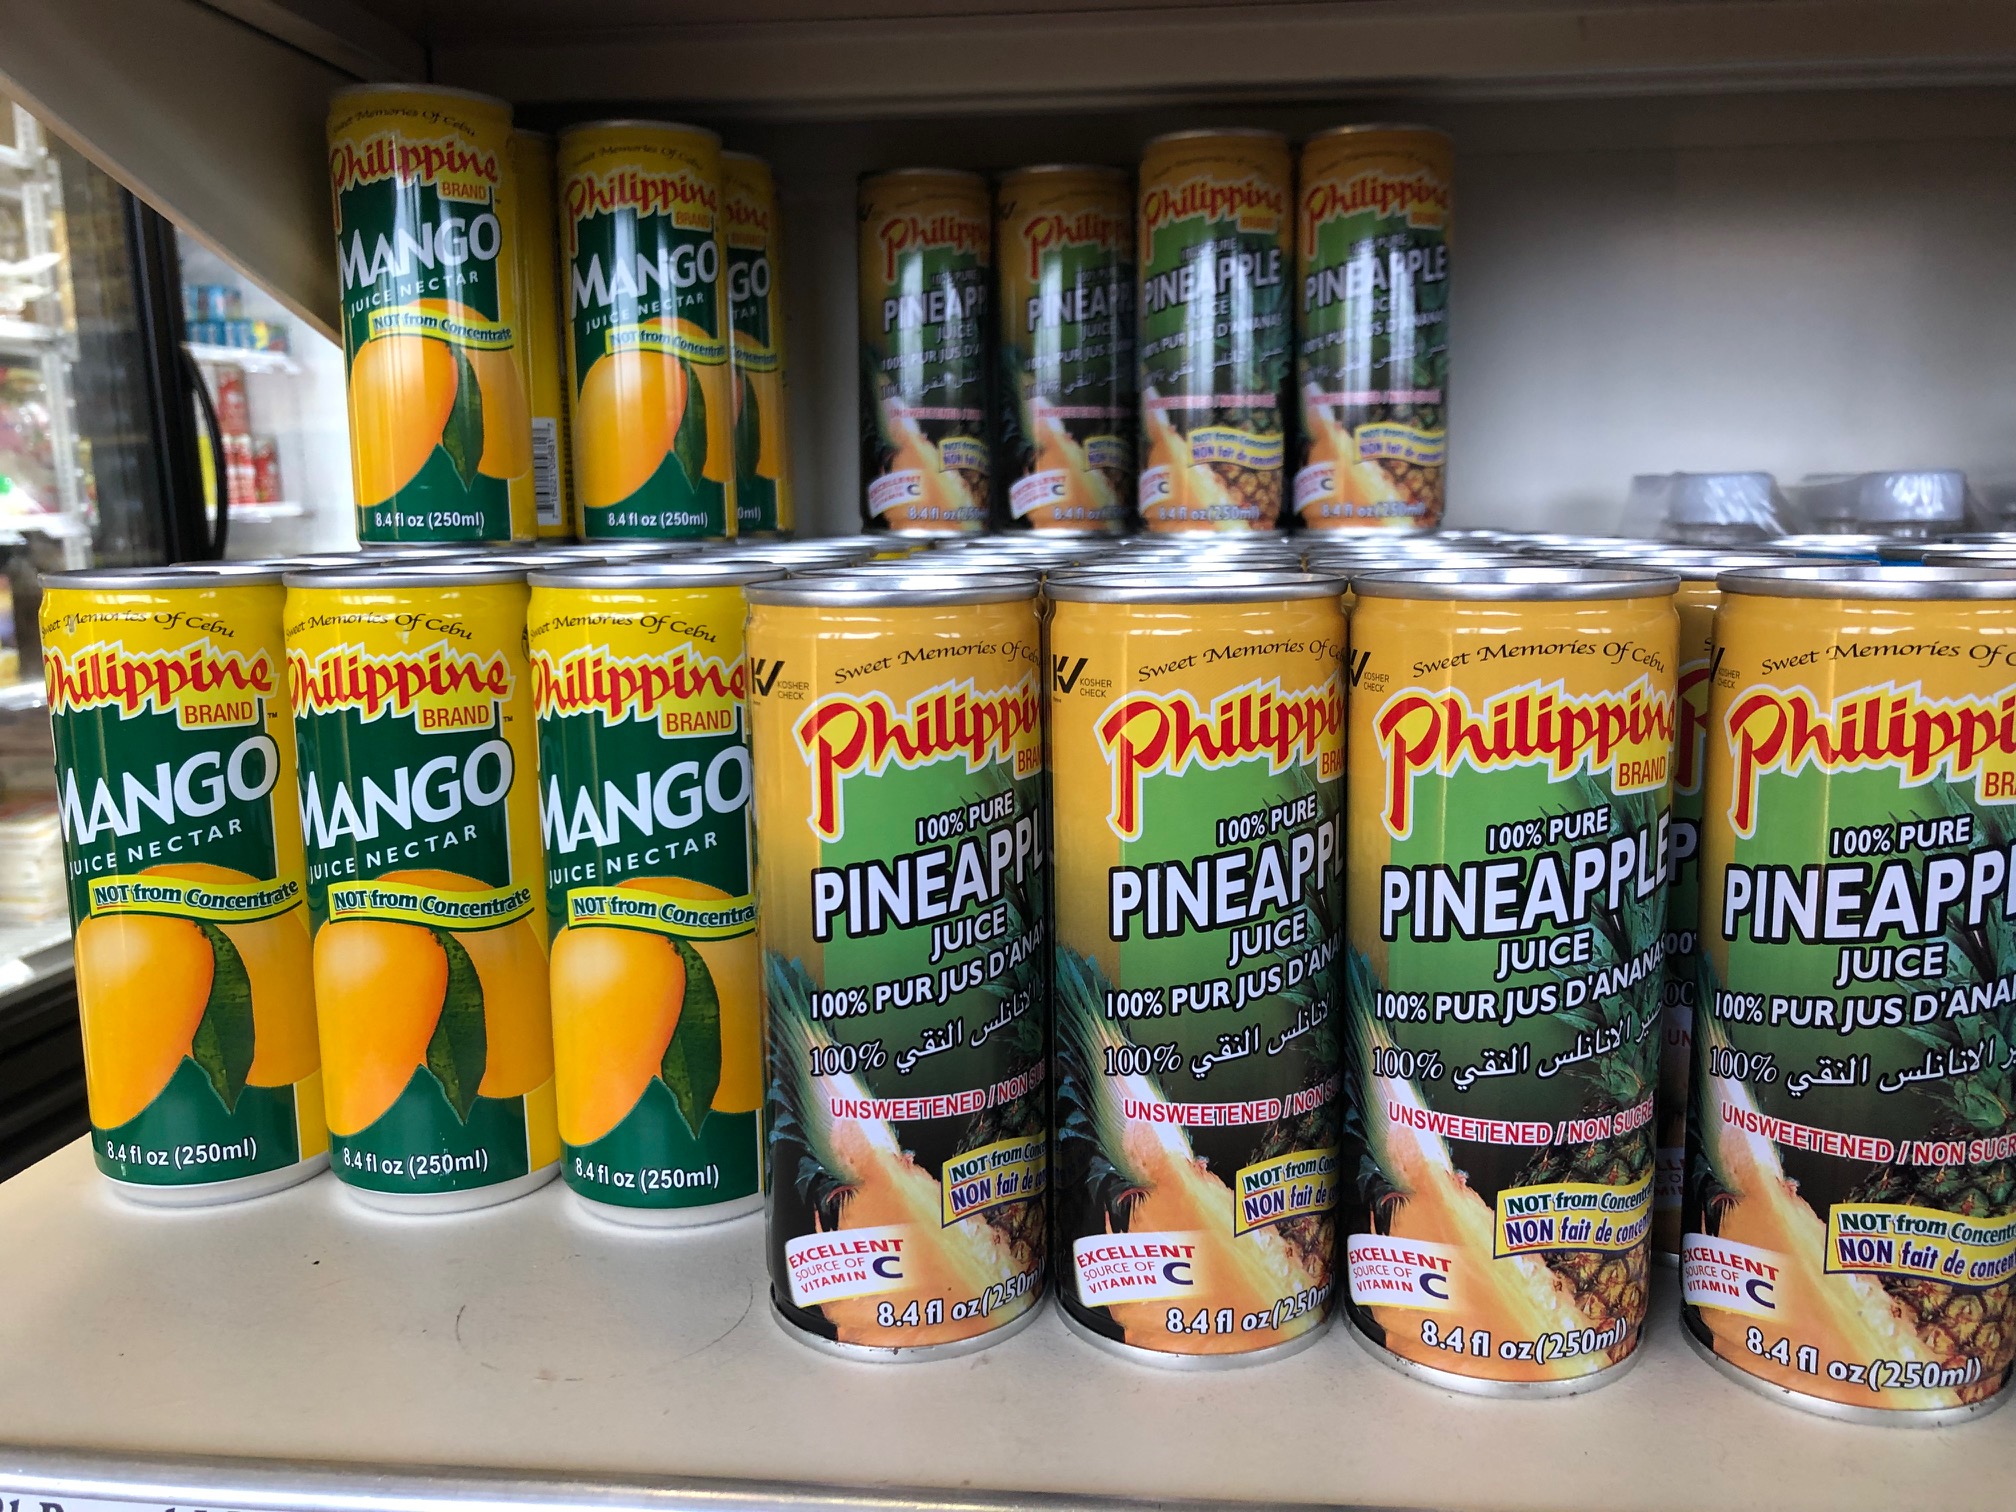 On a shelf, several cans of mango and pineapple juice are labels-forward on a shelf. Photo by Alyssa Buckley.